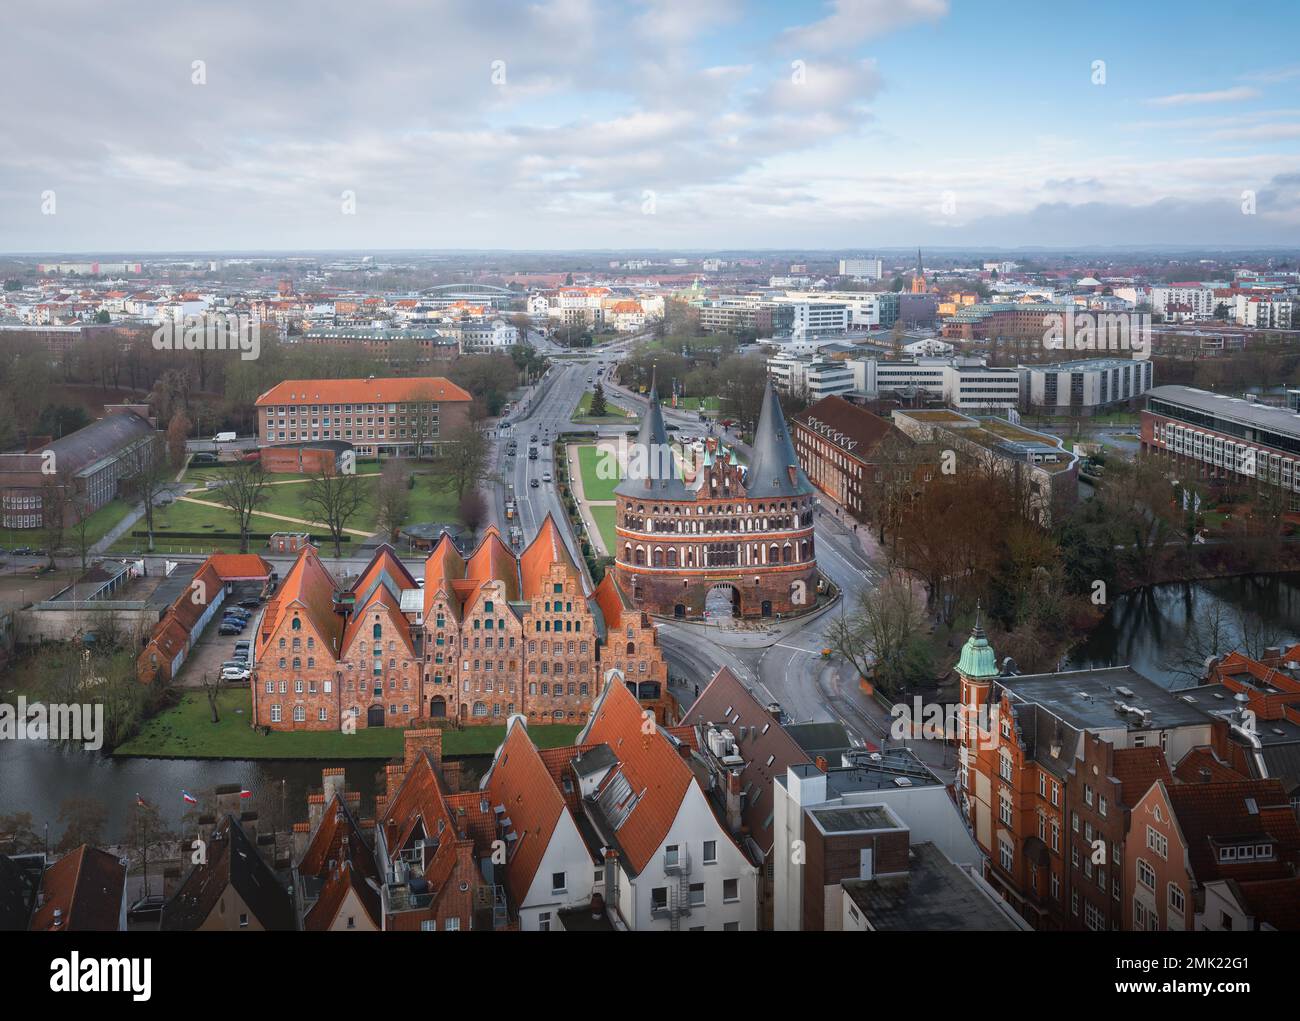 Aerial view of Lubeck with Holstentor (Holsten Gate) and Salzspeicher buildings - Lubeck, Germany Stock Photo